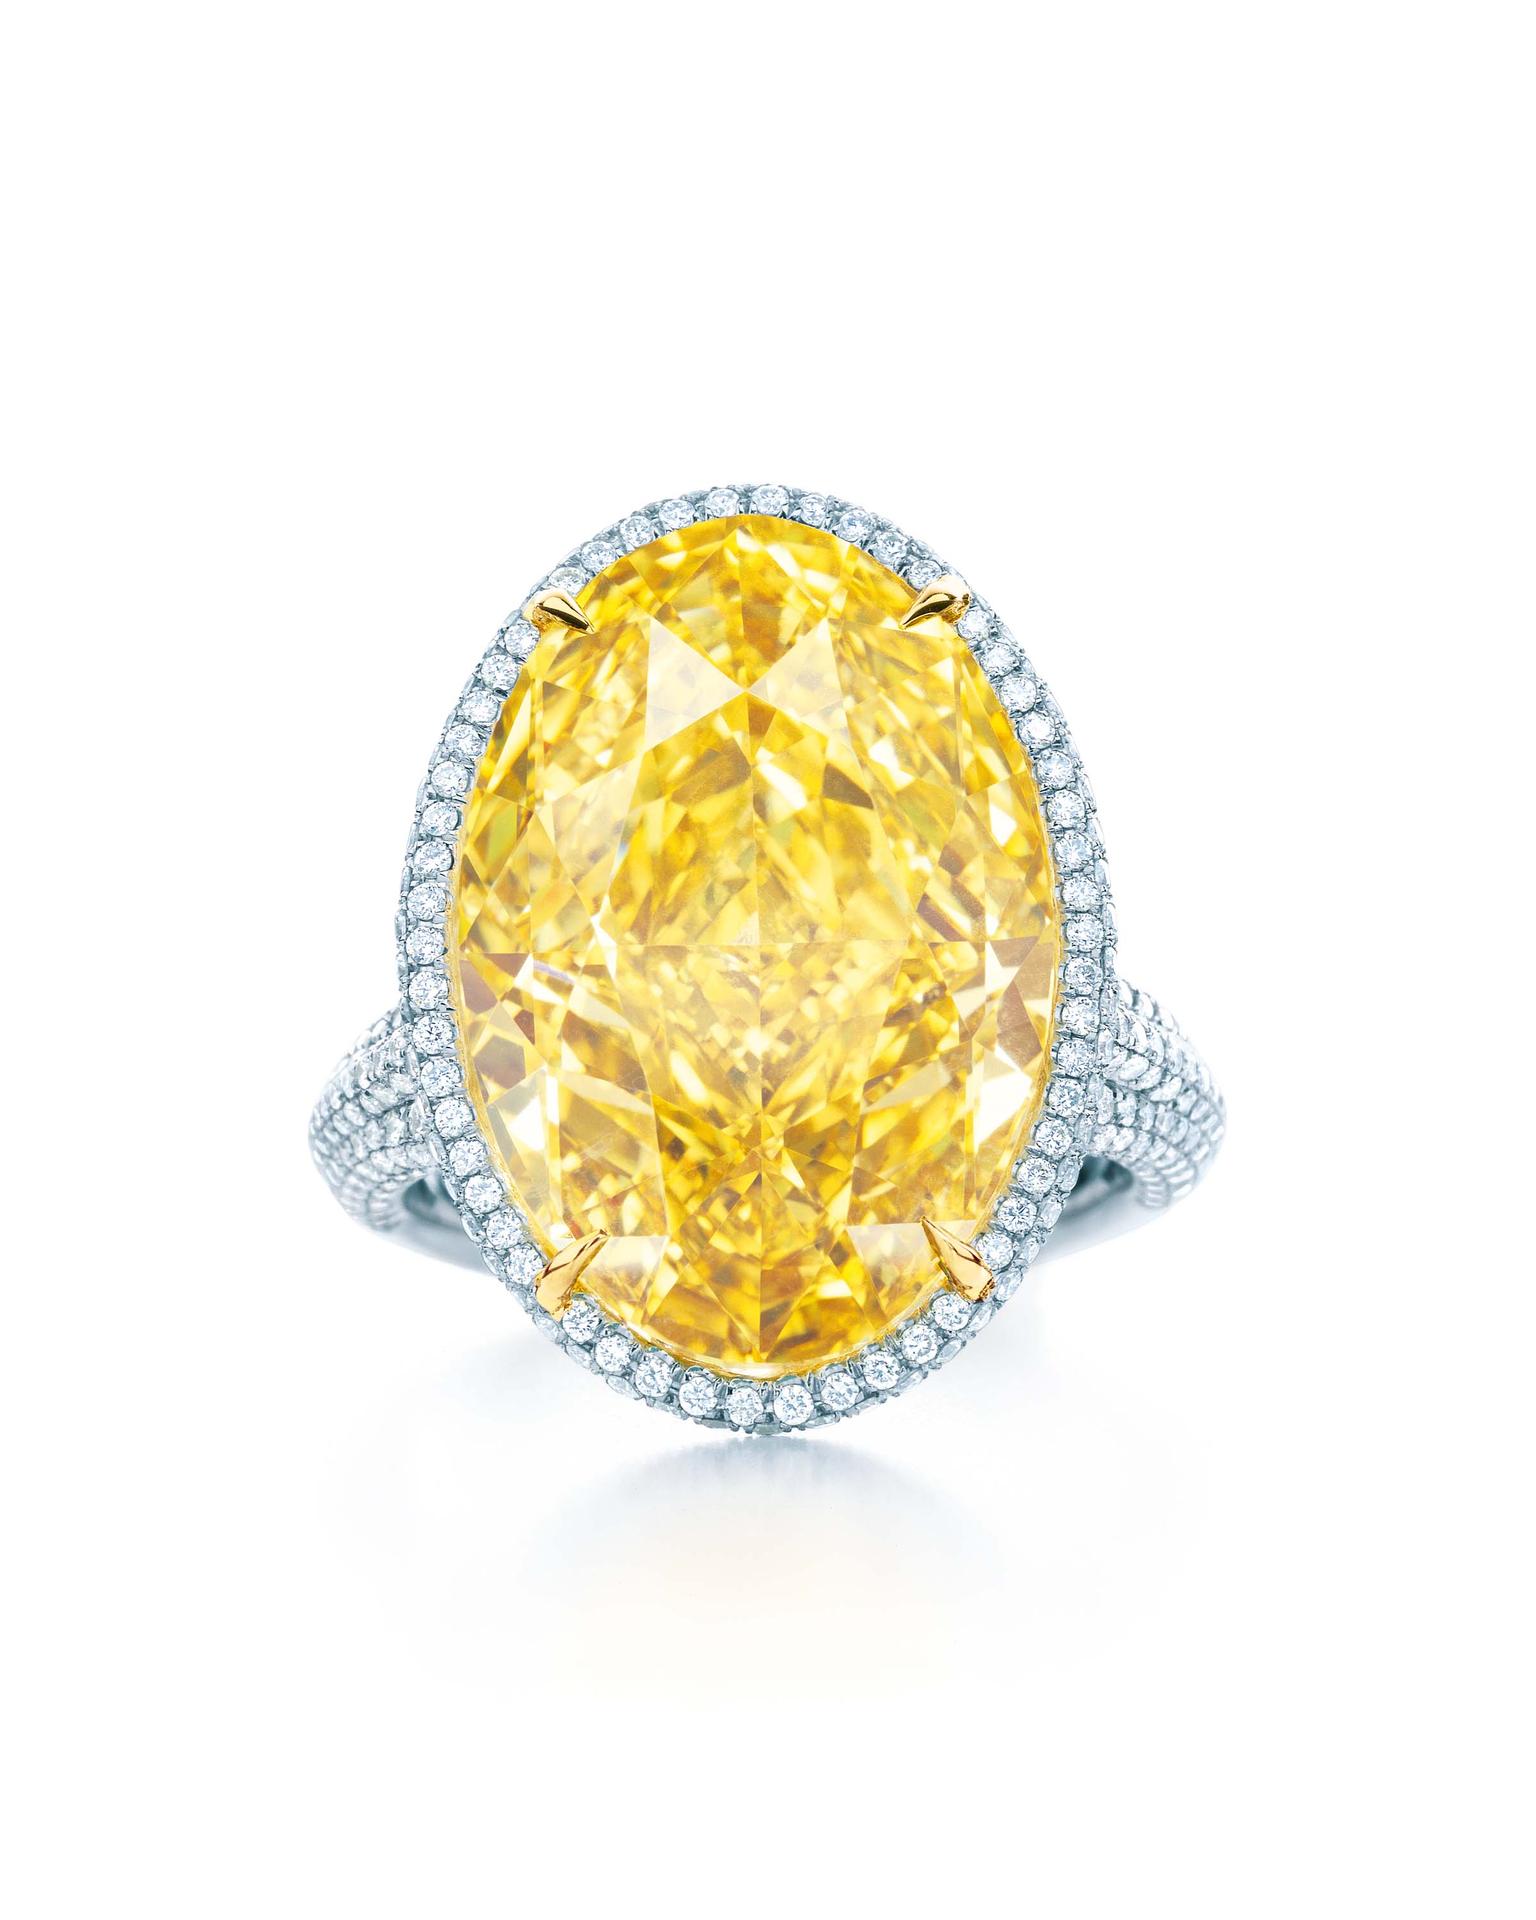 Tiffany & Co. Blue Book Collection 15.04ct Fancy Vivid yellow diamond ring set in platinum and gold (£POA)